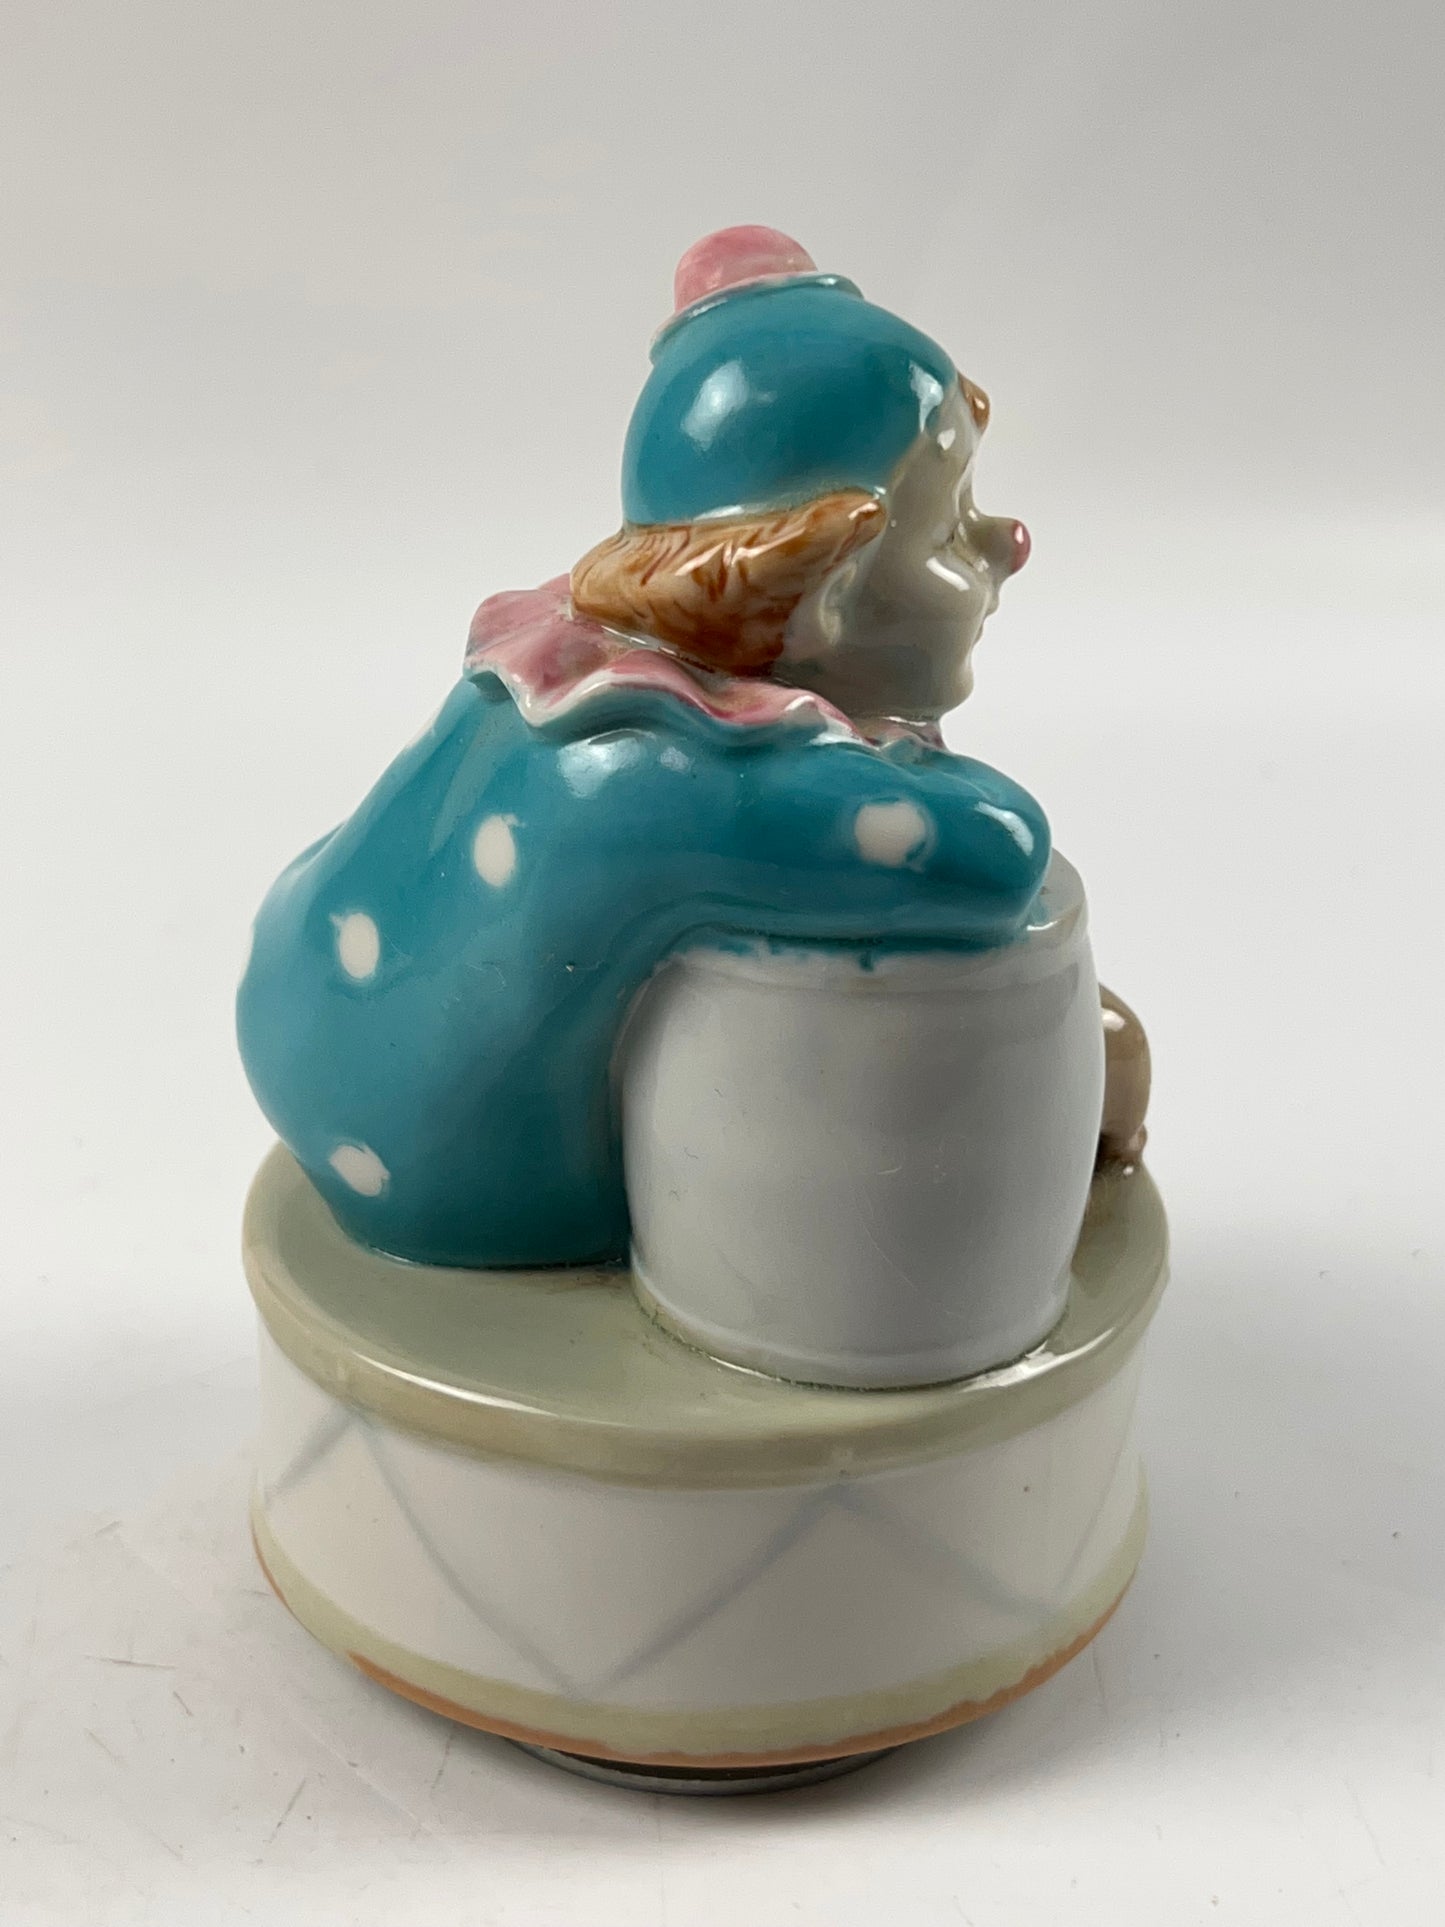 Vtg Summit Collection Exclusive Porcelain Music Box Hand-Painted Clown & Dog